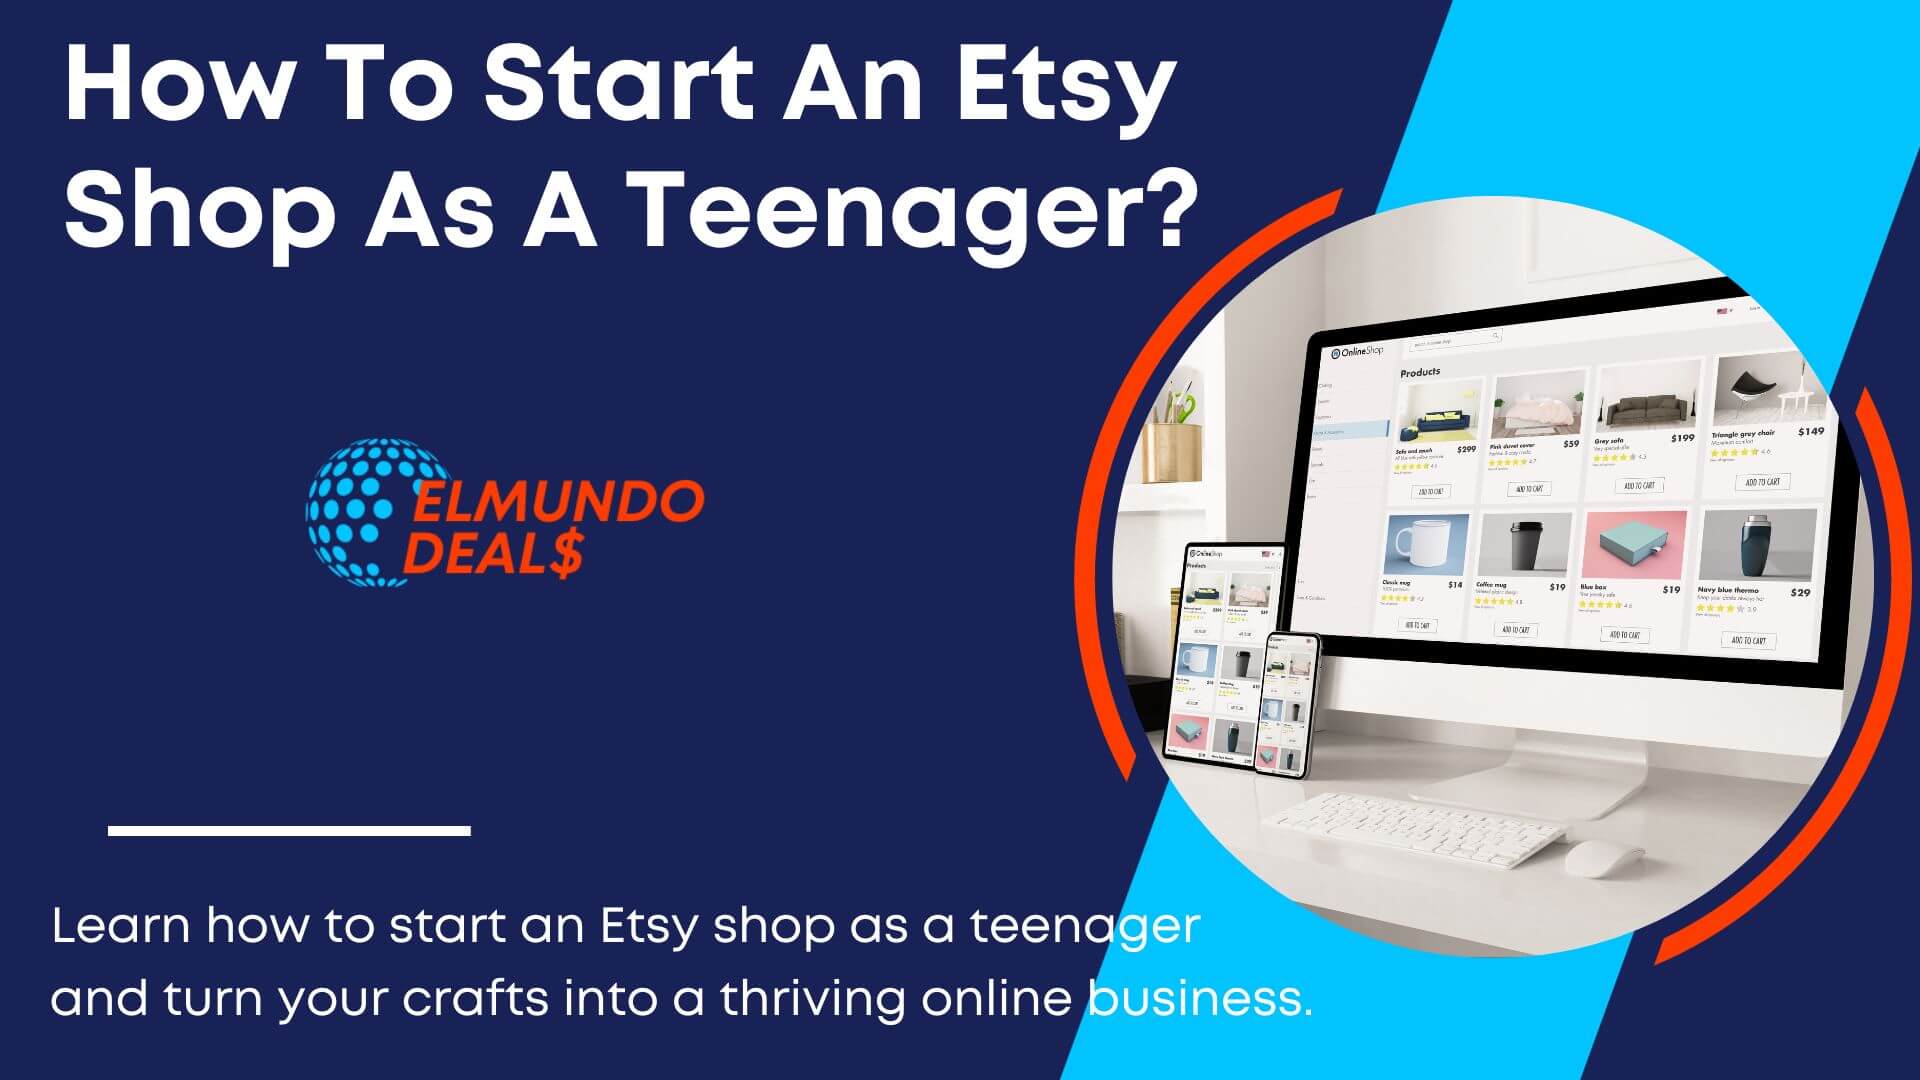 How To Start An Etsy Shop As A Teenager?